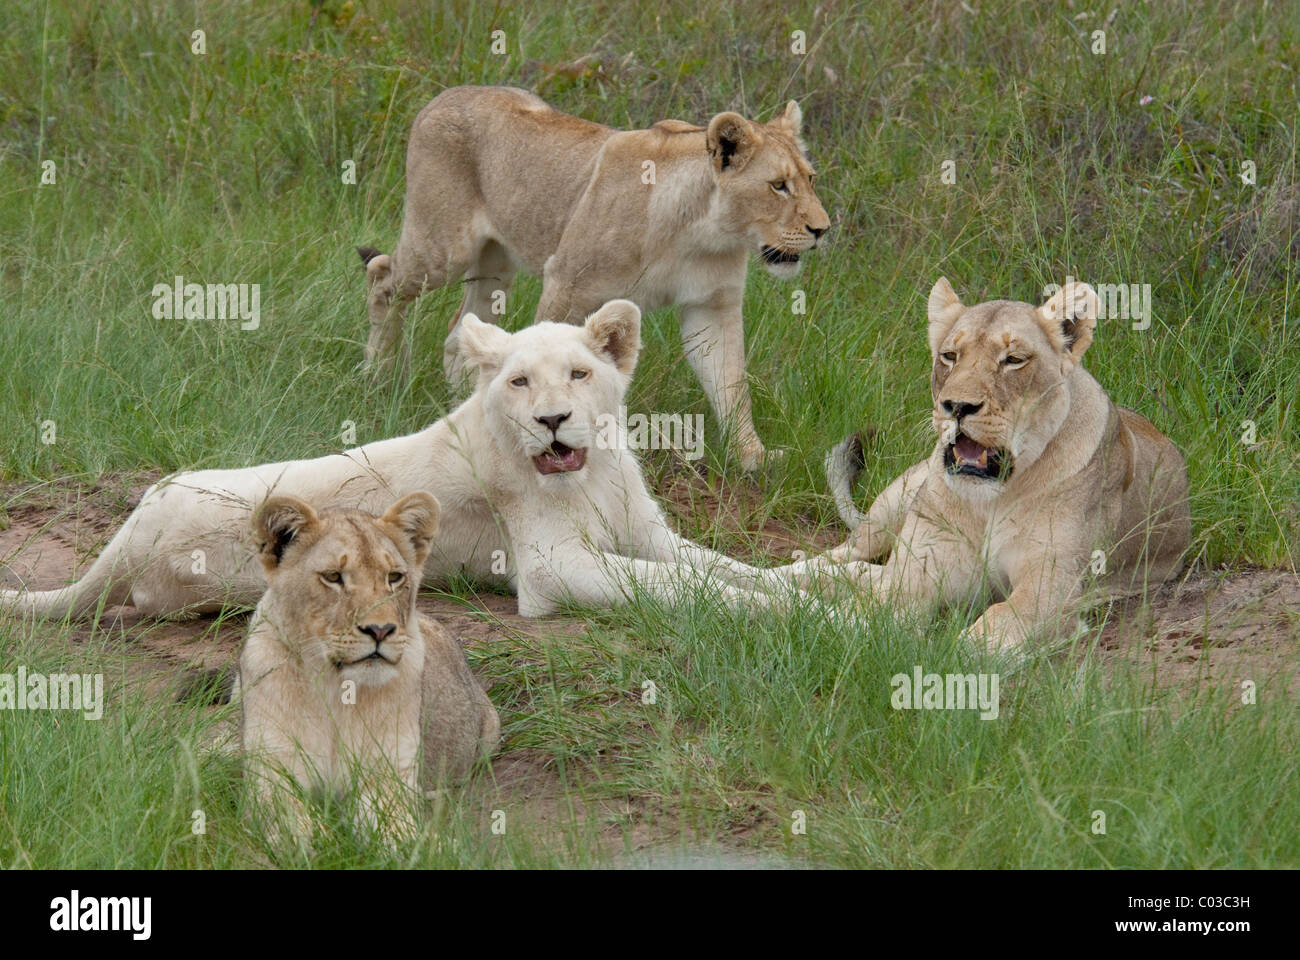 South Africa, East London, Inkwenkwezi Private Game Reserve. Unique pride of creamy to white colored African lions. Stock Photo